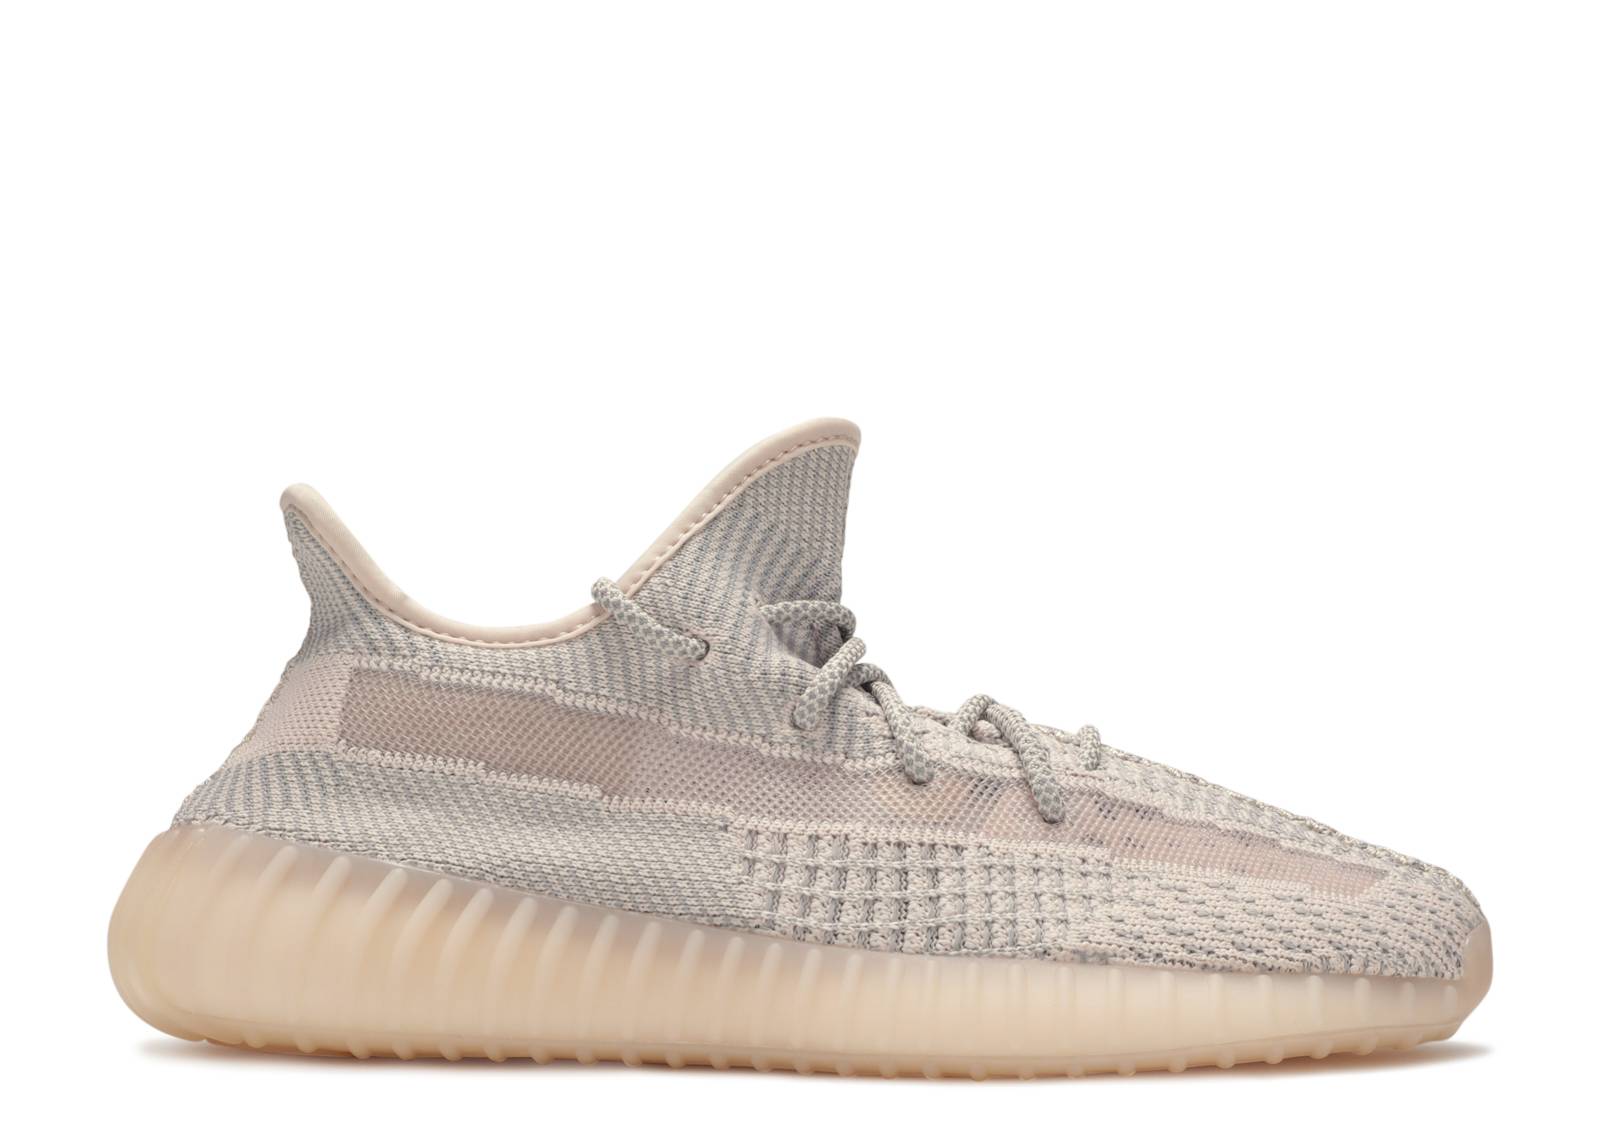 yeezy boost 350 v2 synth